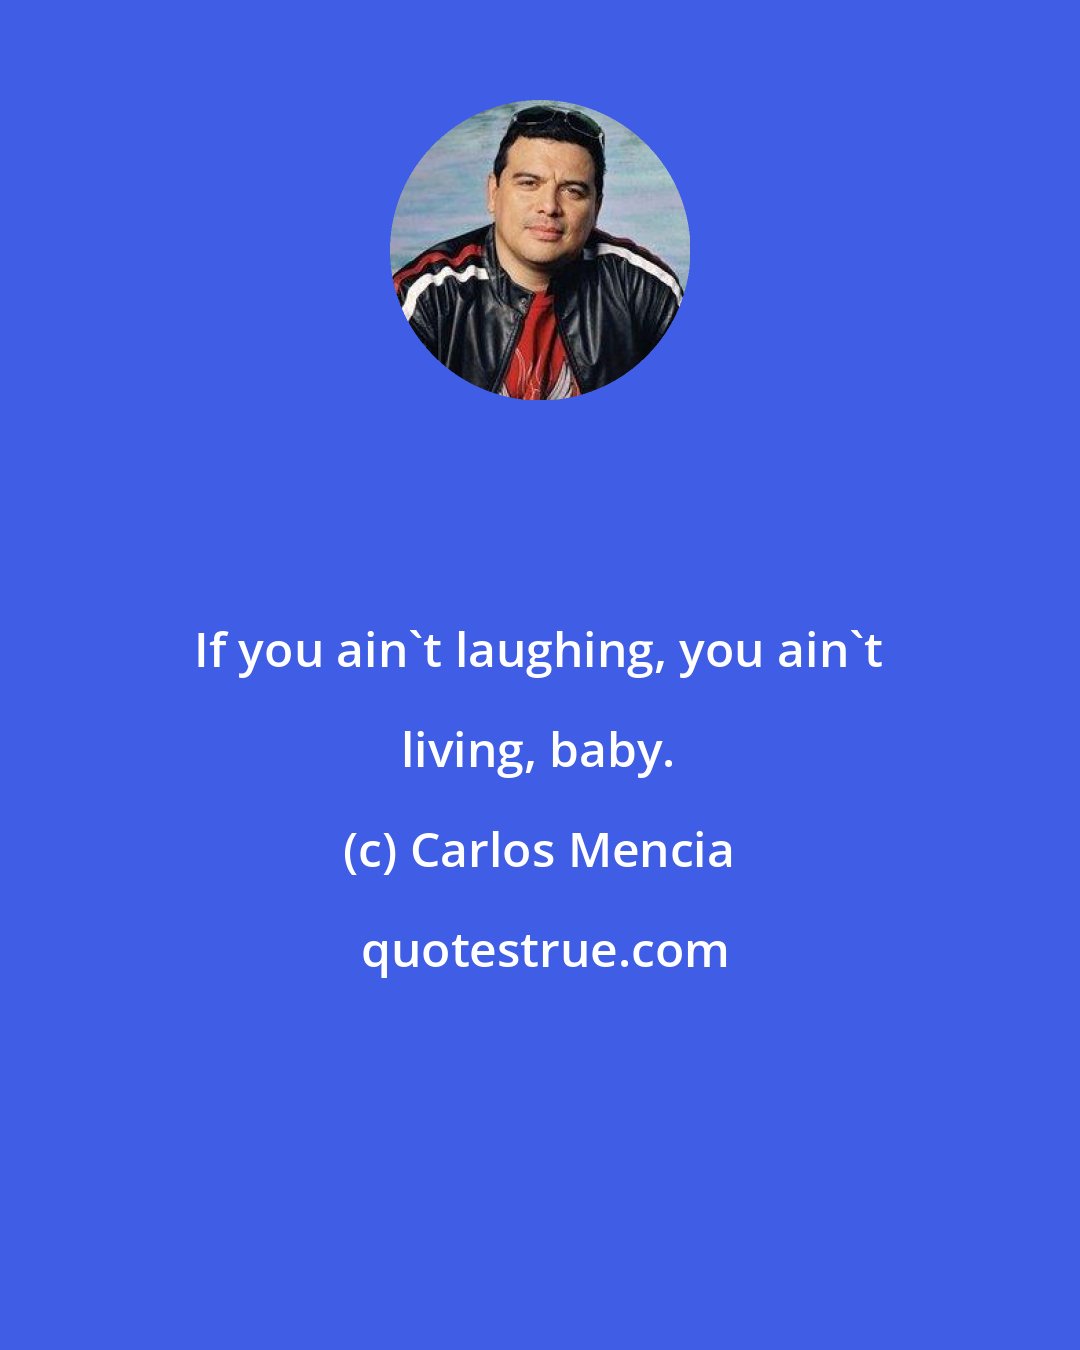 Carlos Mencia: If you ain't laughing, you ain't living, baby.